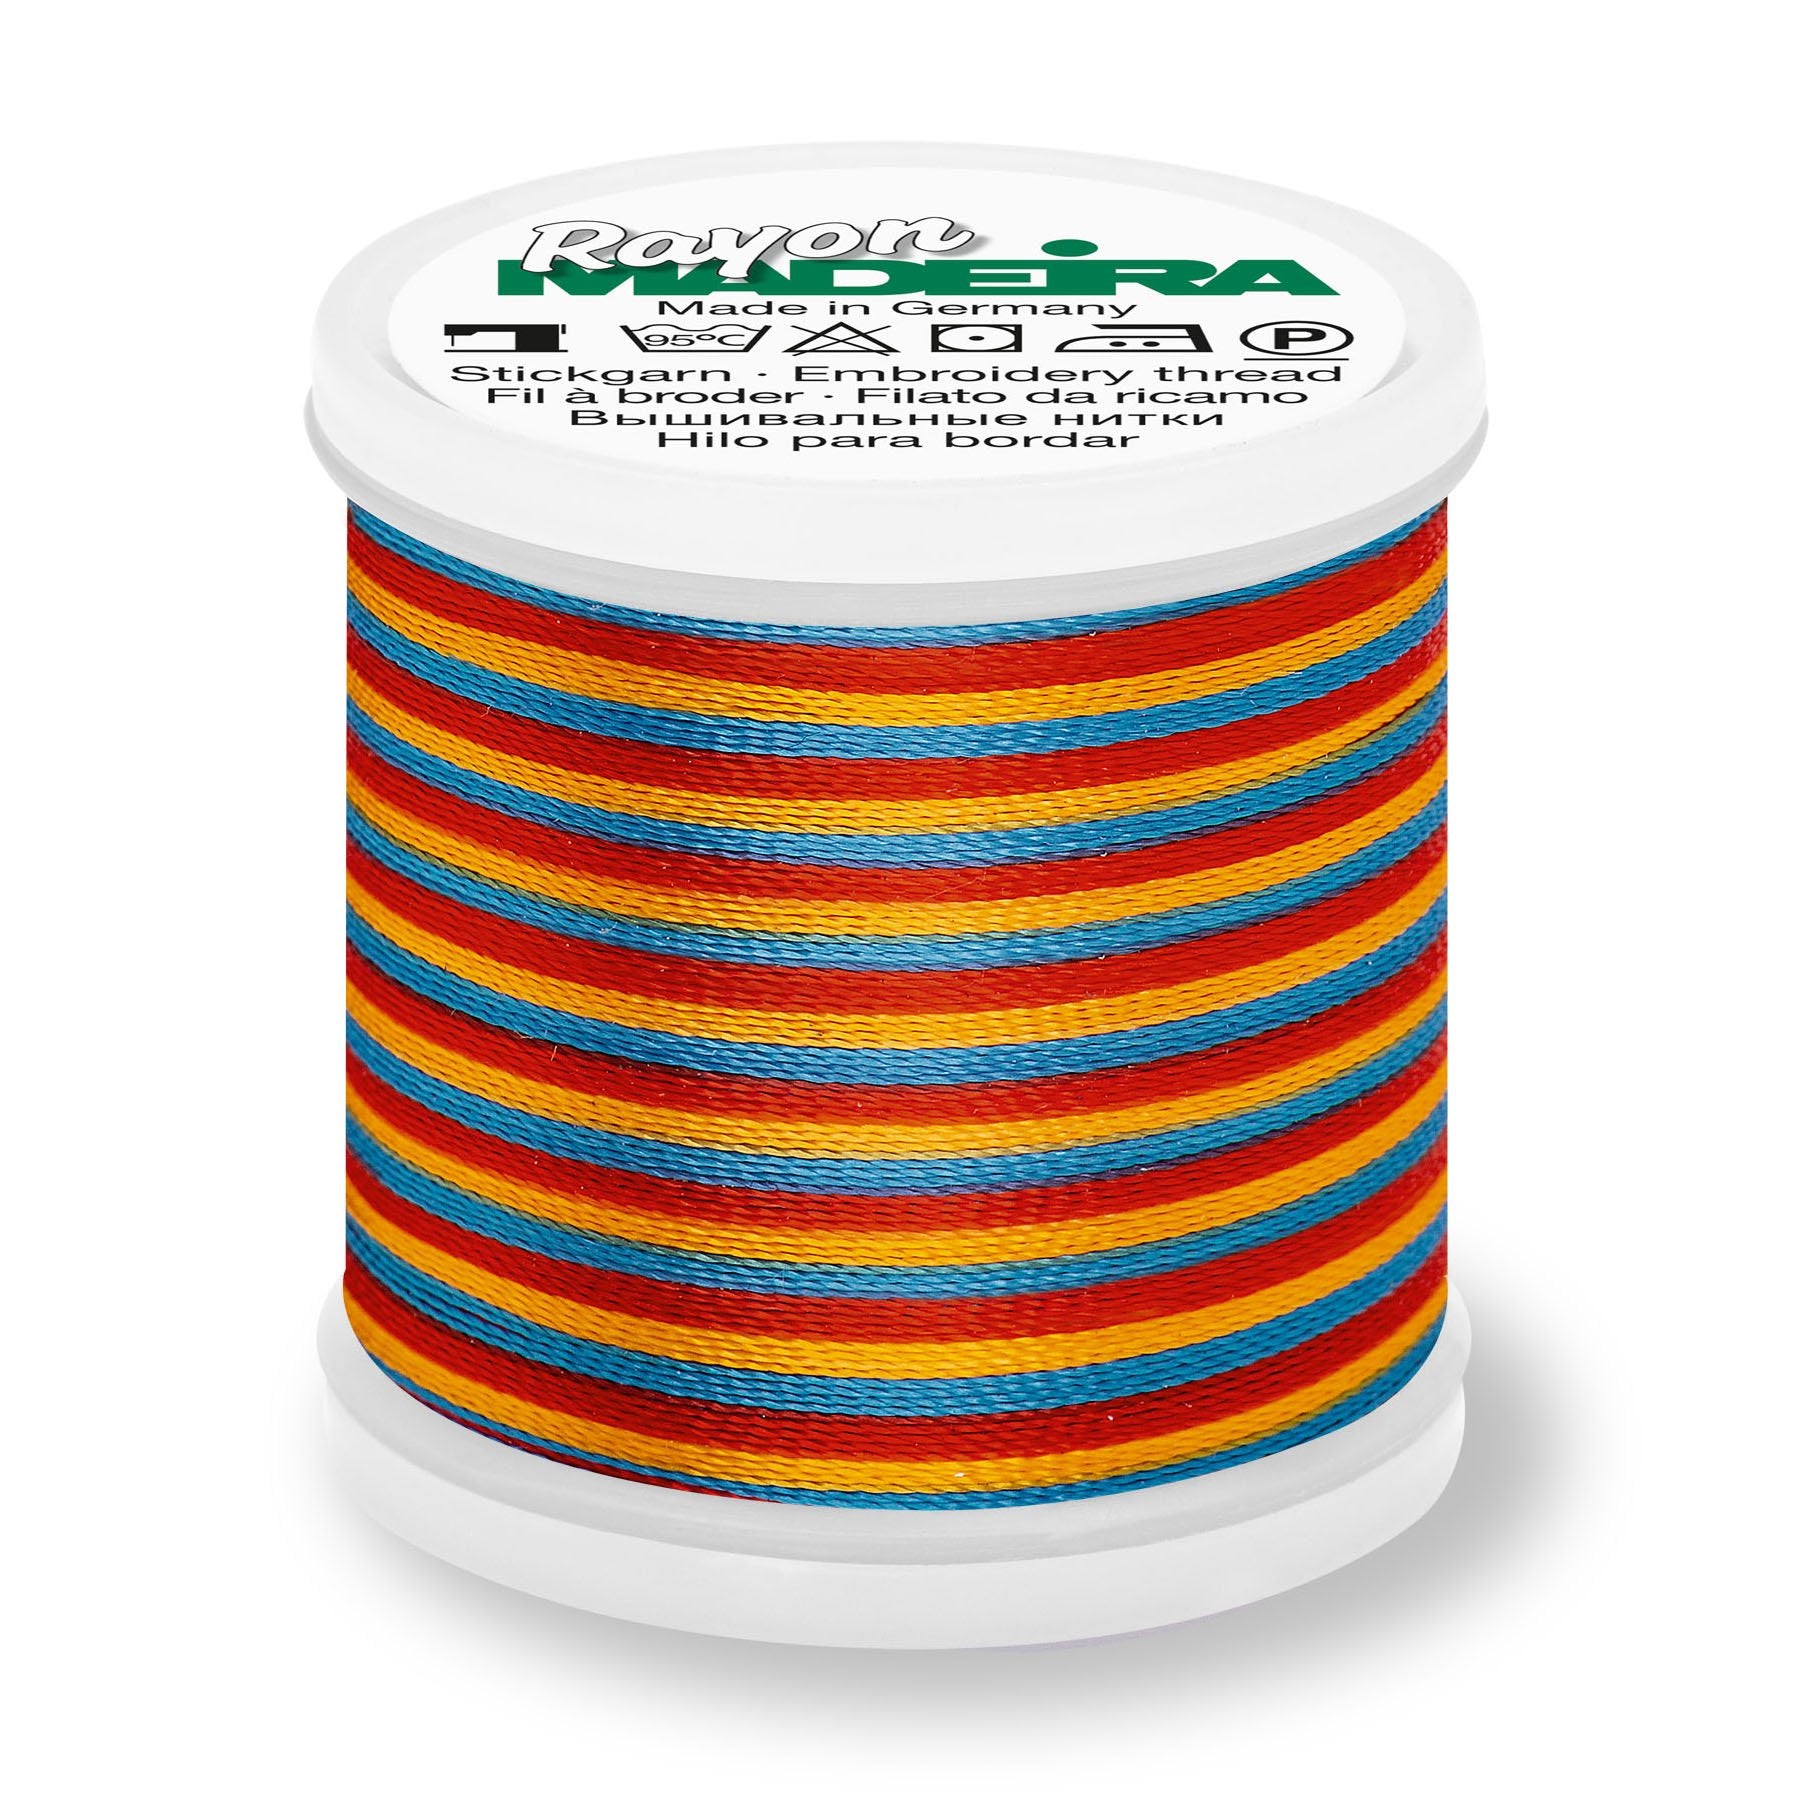 Madeira Rayon 40 Embroidery Thread 200m Multi #2142 Primary from Jaycotts Sewing Supplies